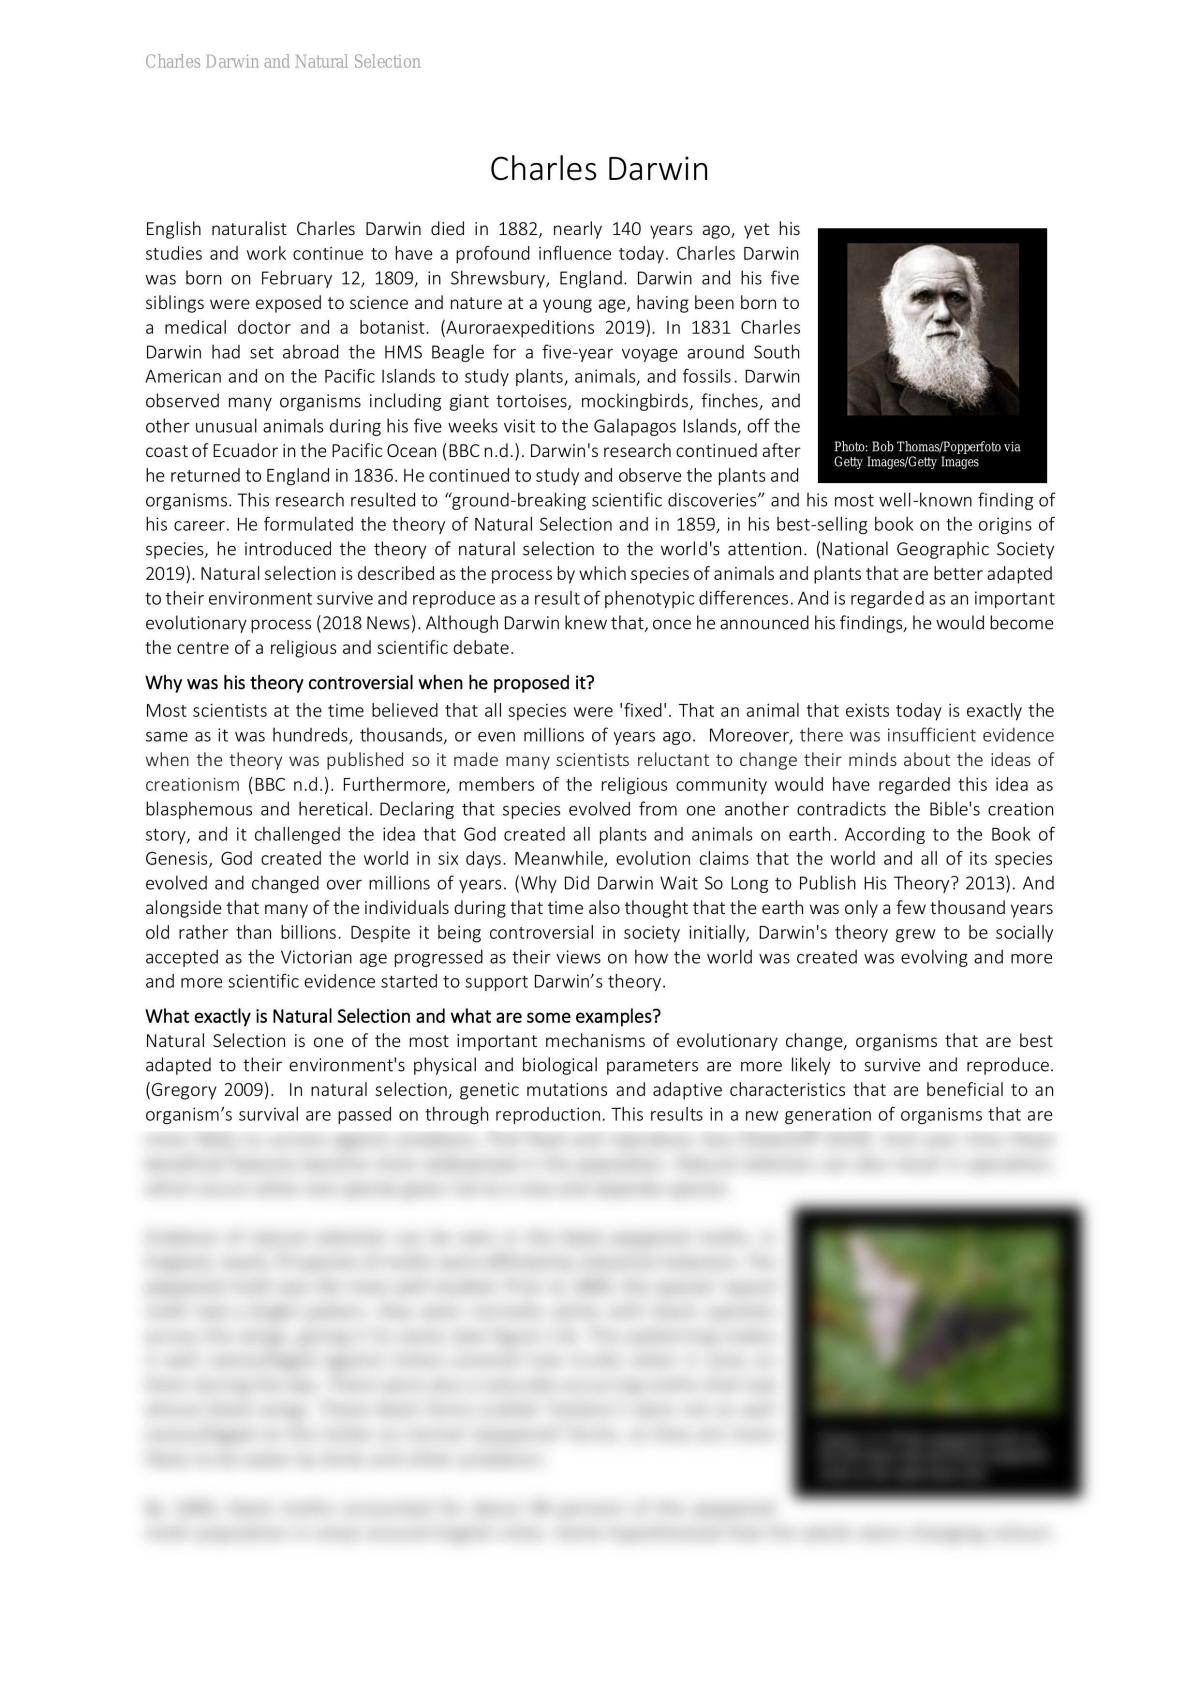 essay about charles darwin